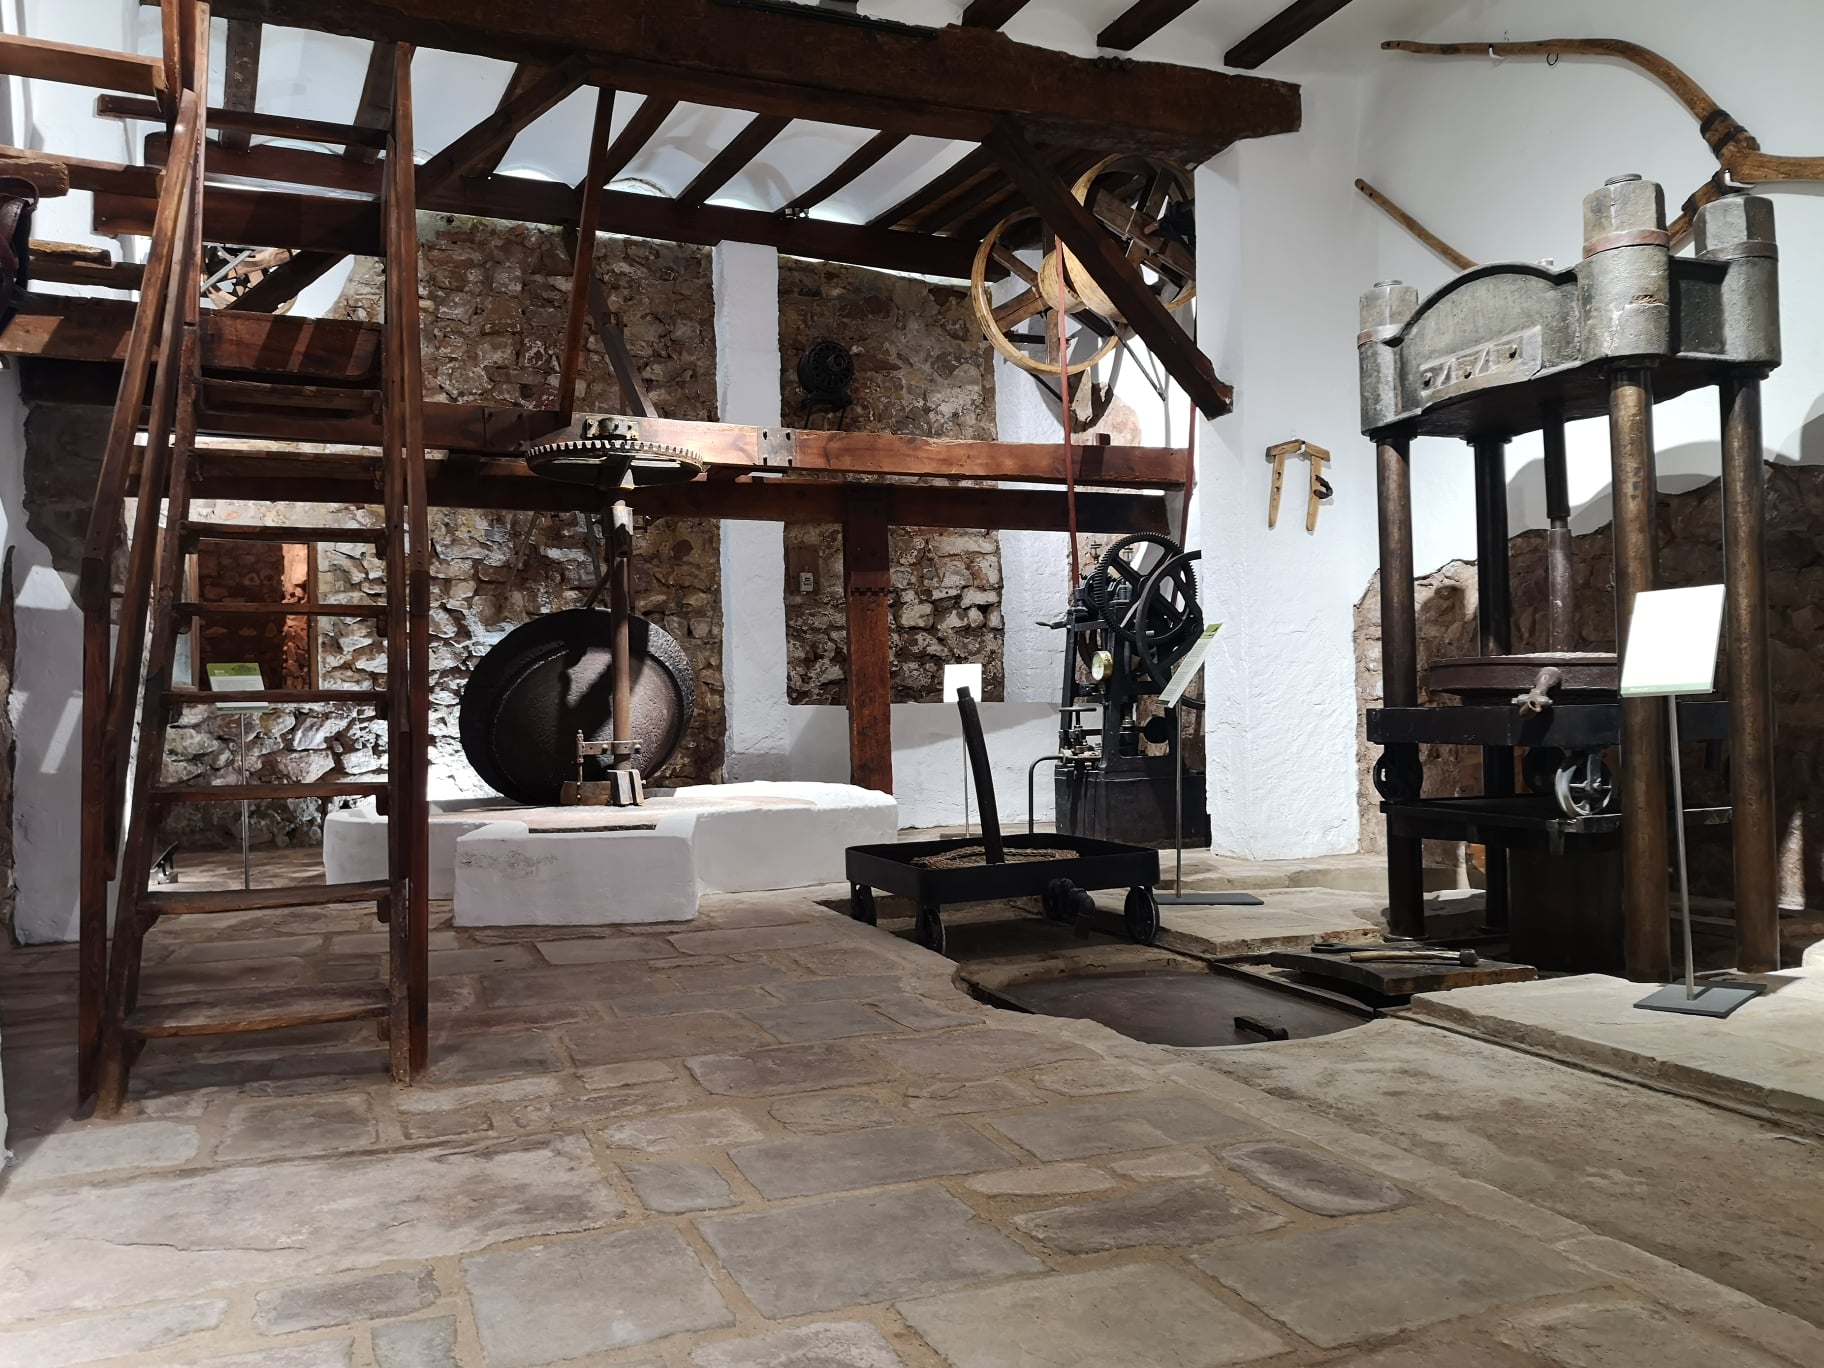 You are currently viewing Serra opens the Museu de l’Oli (Olive Oil Museum) on Pilota Street